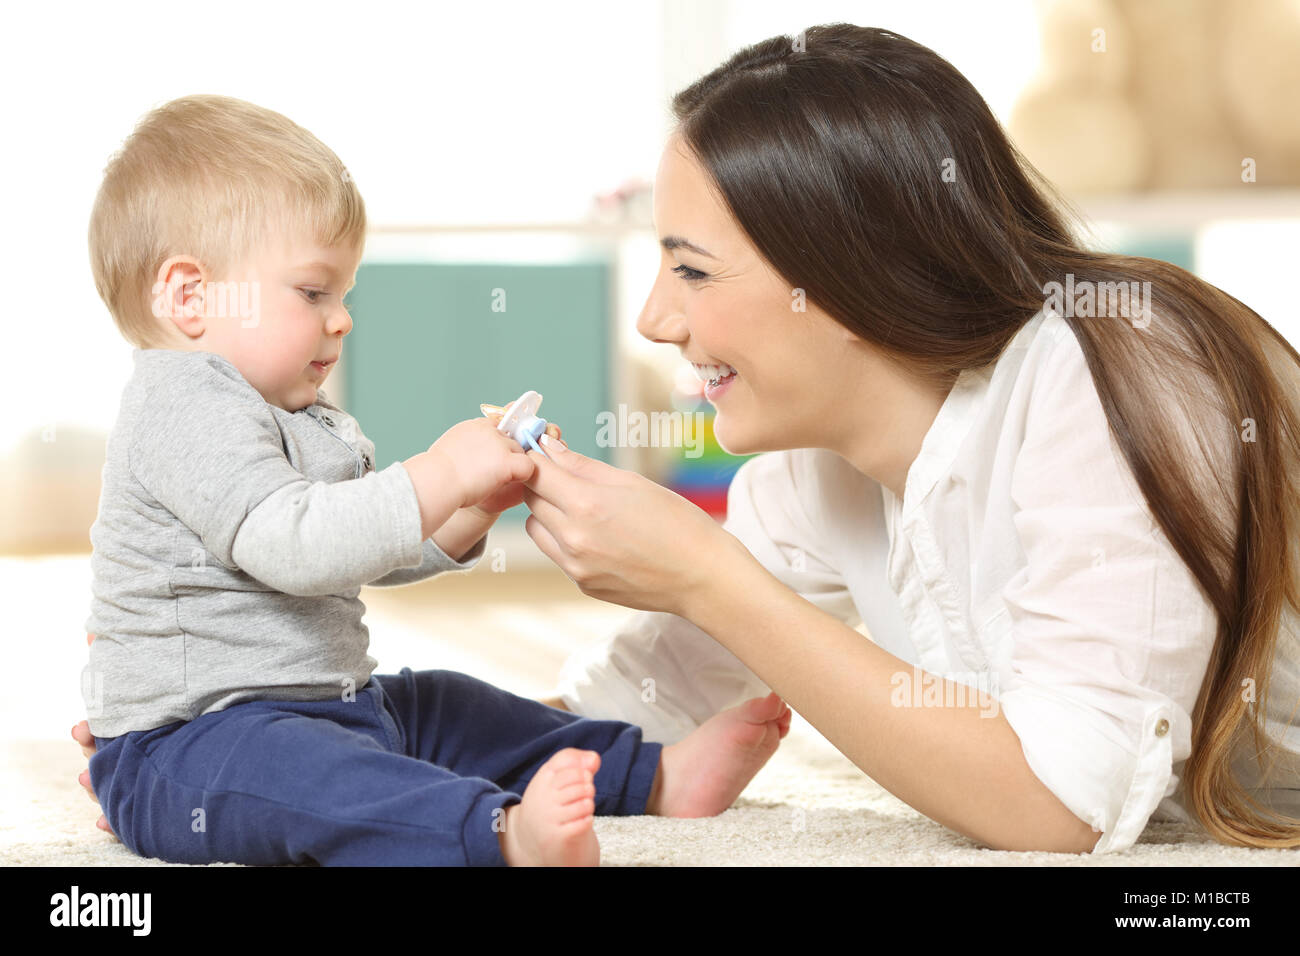 Side view portrait of a proud mother giving a pacifier to her baby on the floor at home Stock Photo